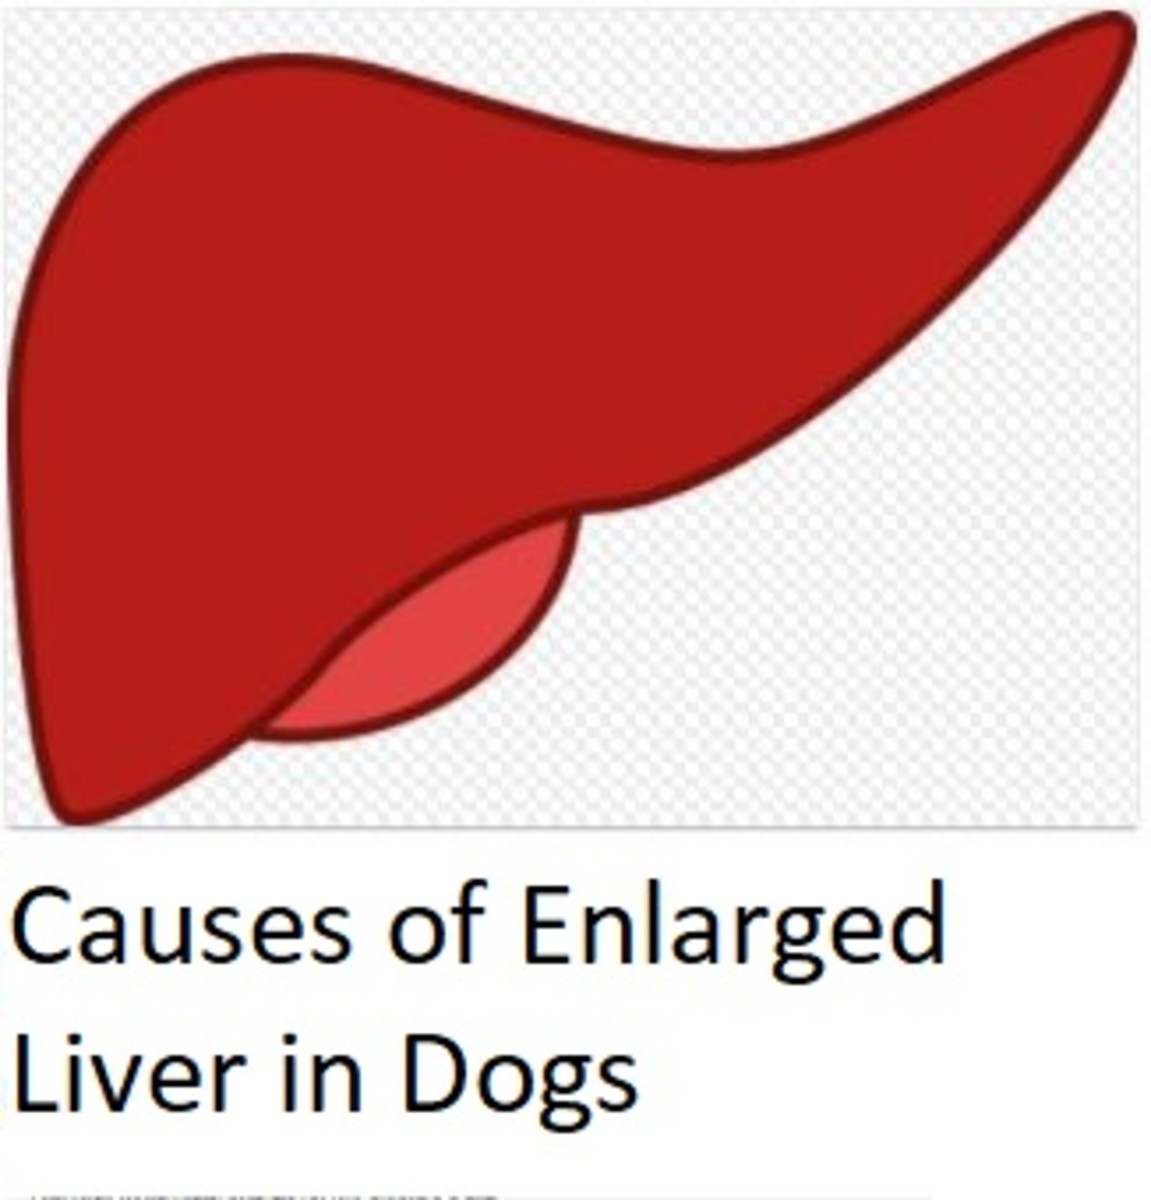  effects of steroids on the dog's liver.